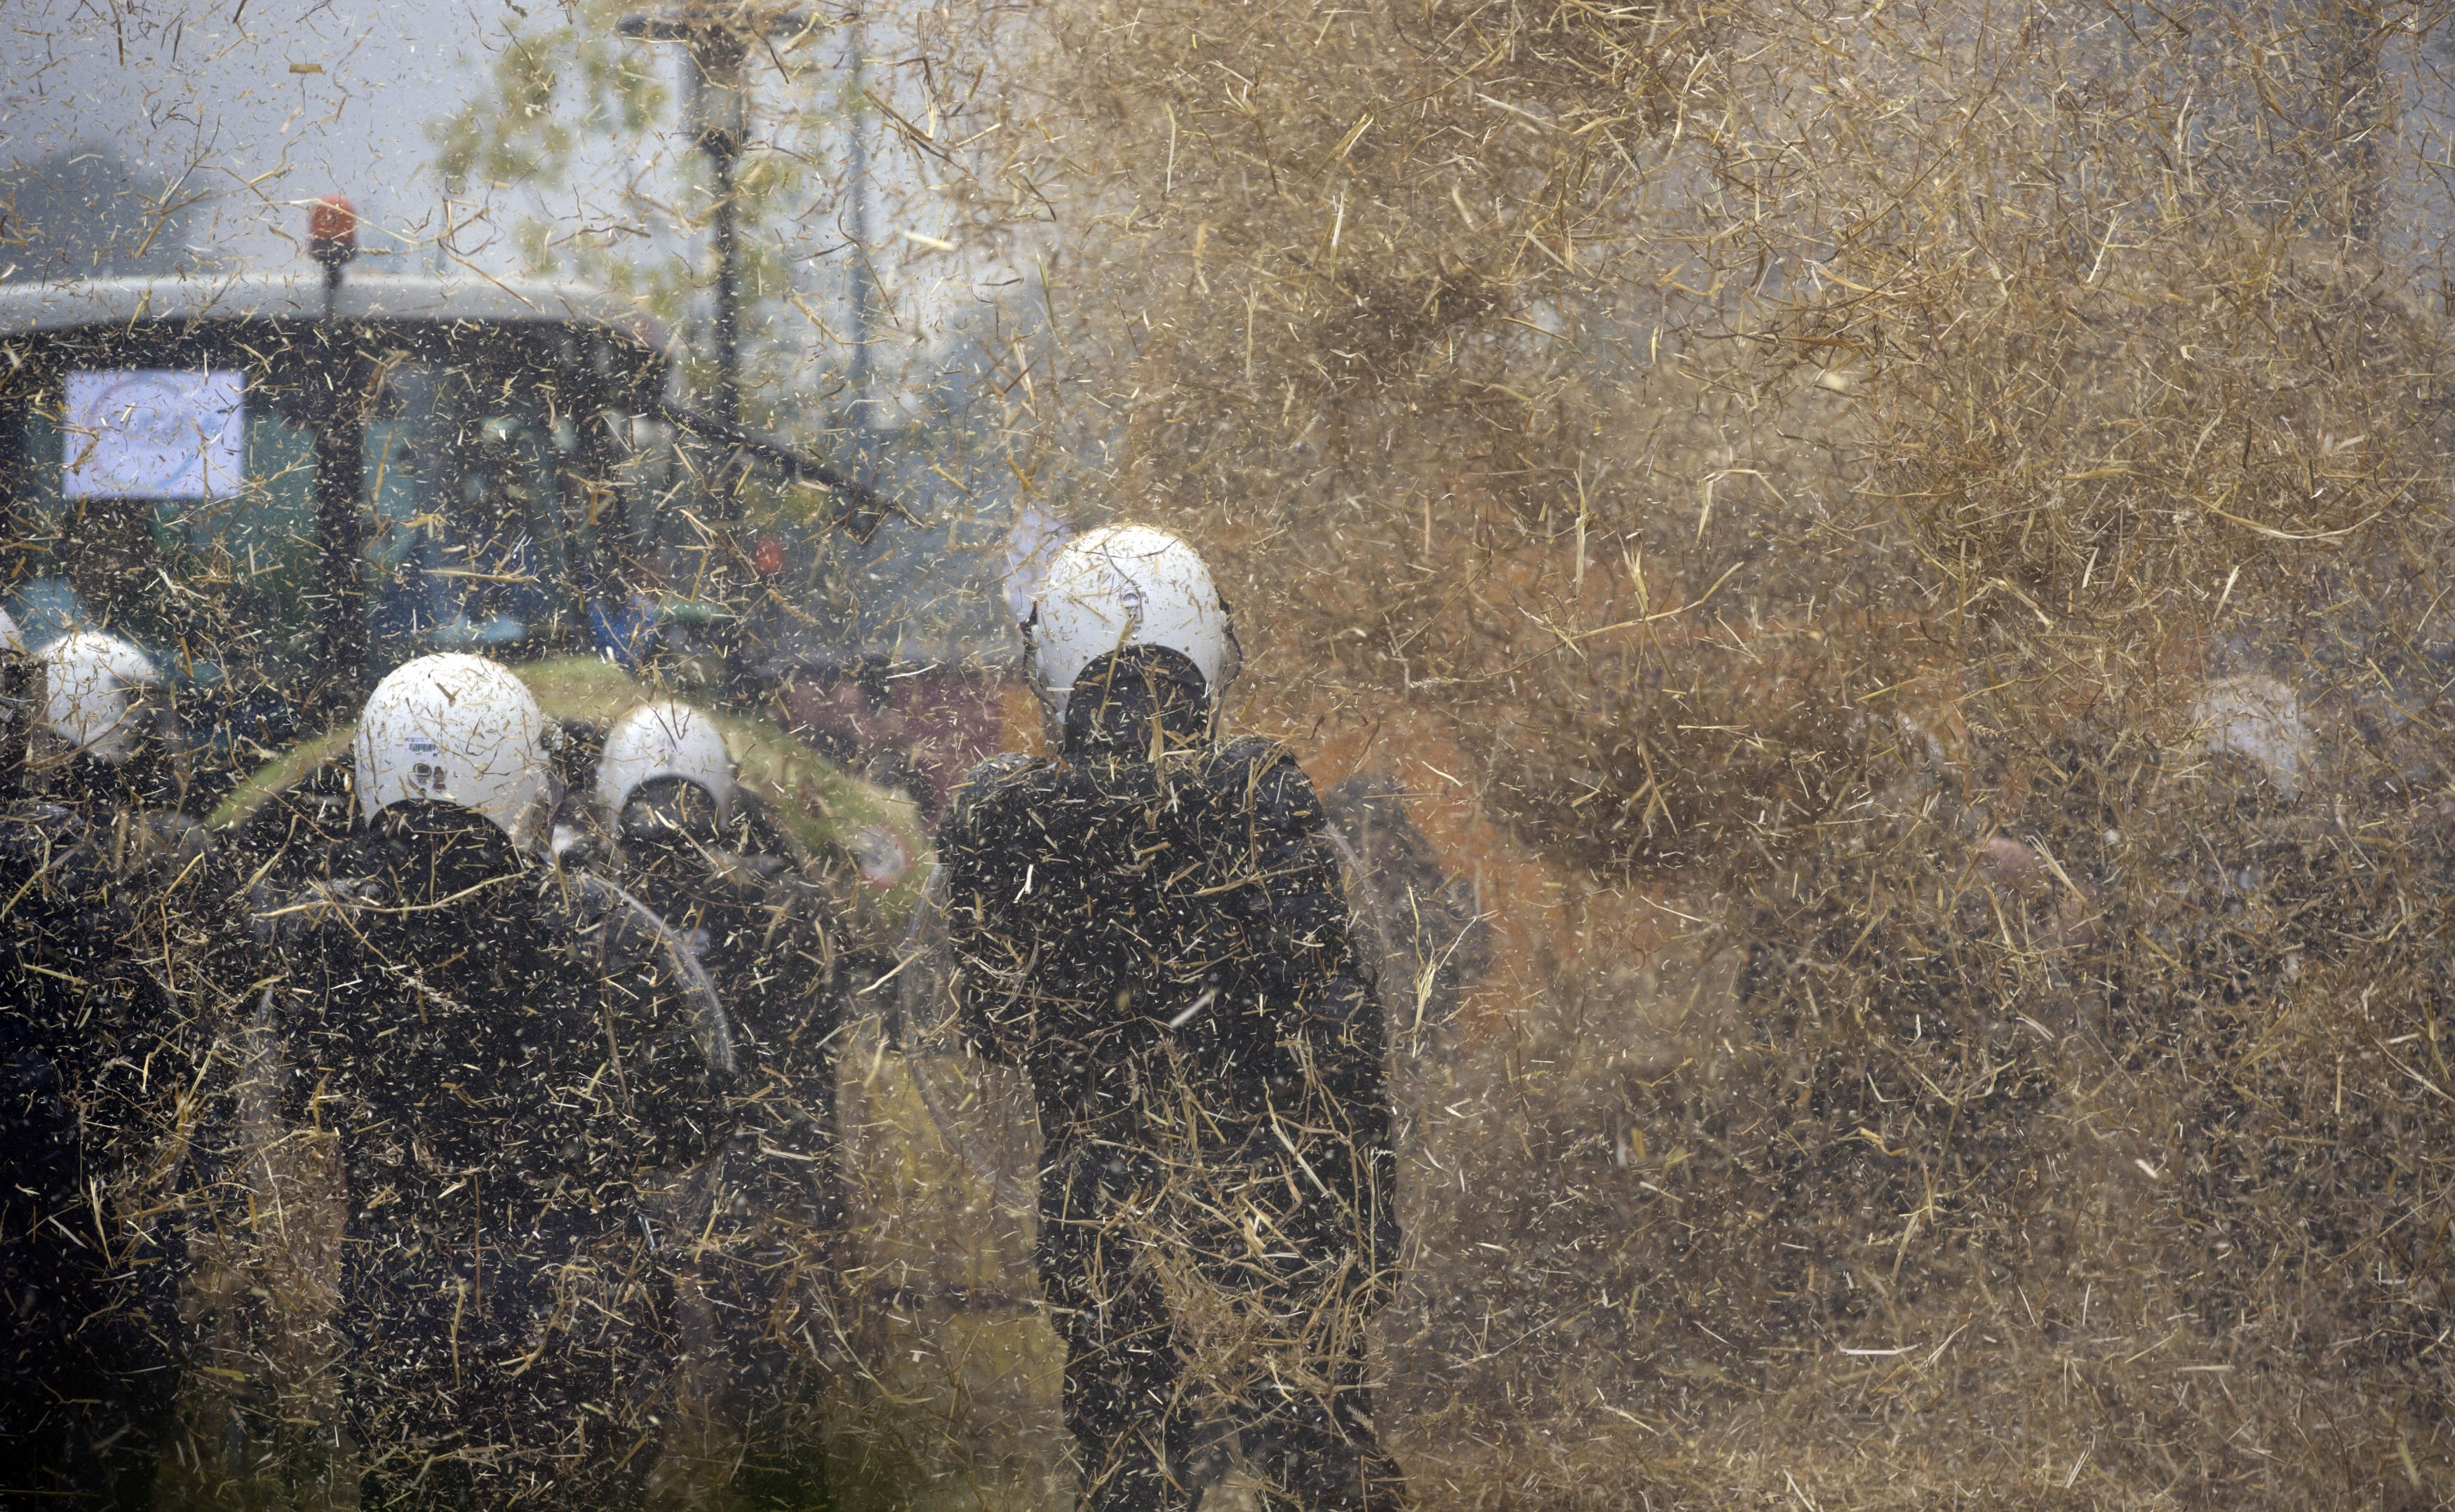 Police are sprayed with a hay machine